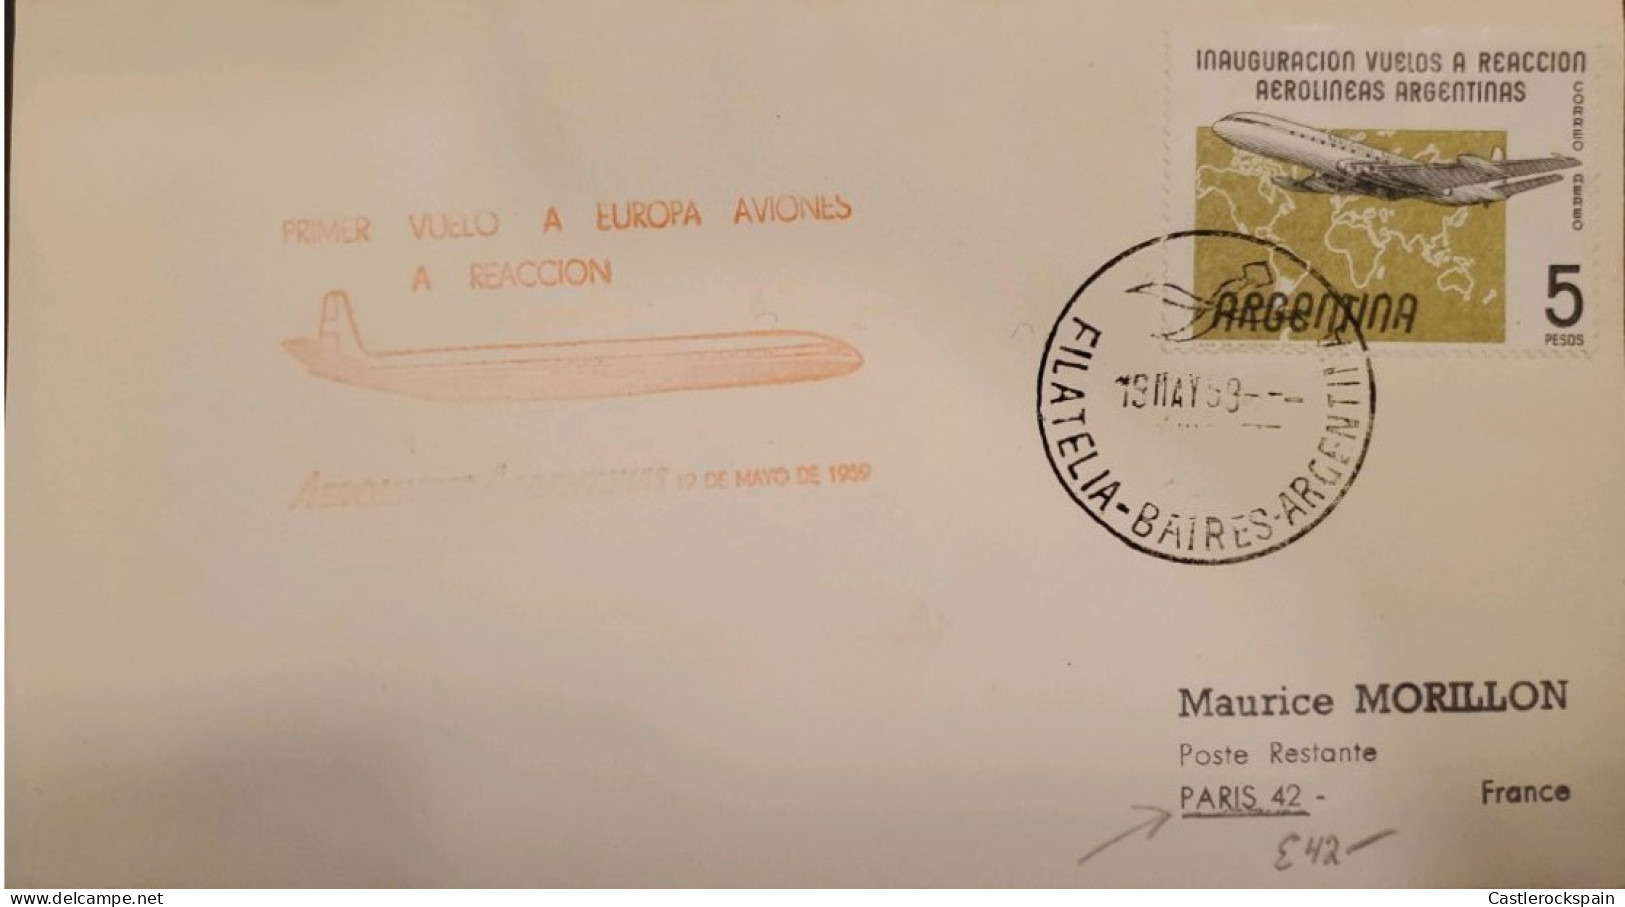 MI) 1958, ARGENTINA, FIRST FLIGHT TO EUROPE CANCELLATION, FROM BUENOS AIRES TO PARIS - FRANCE, AIR MAIL, XF - Usados